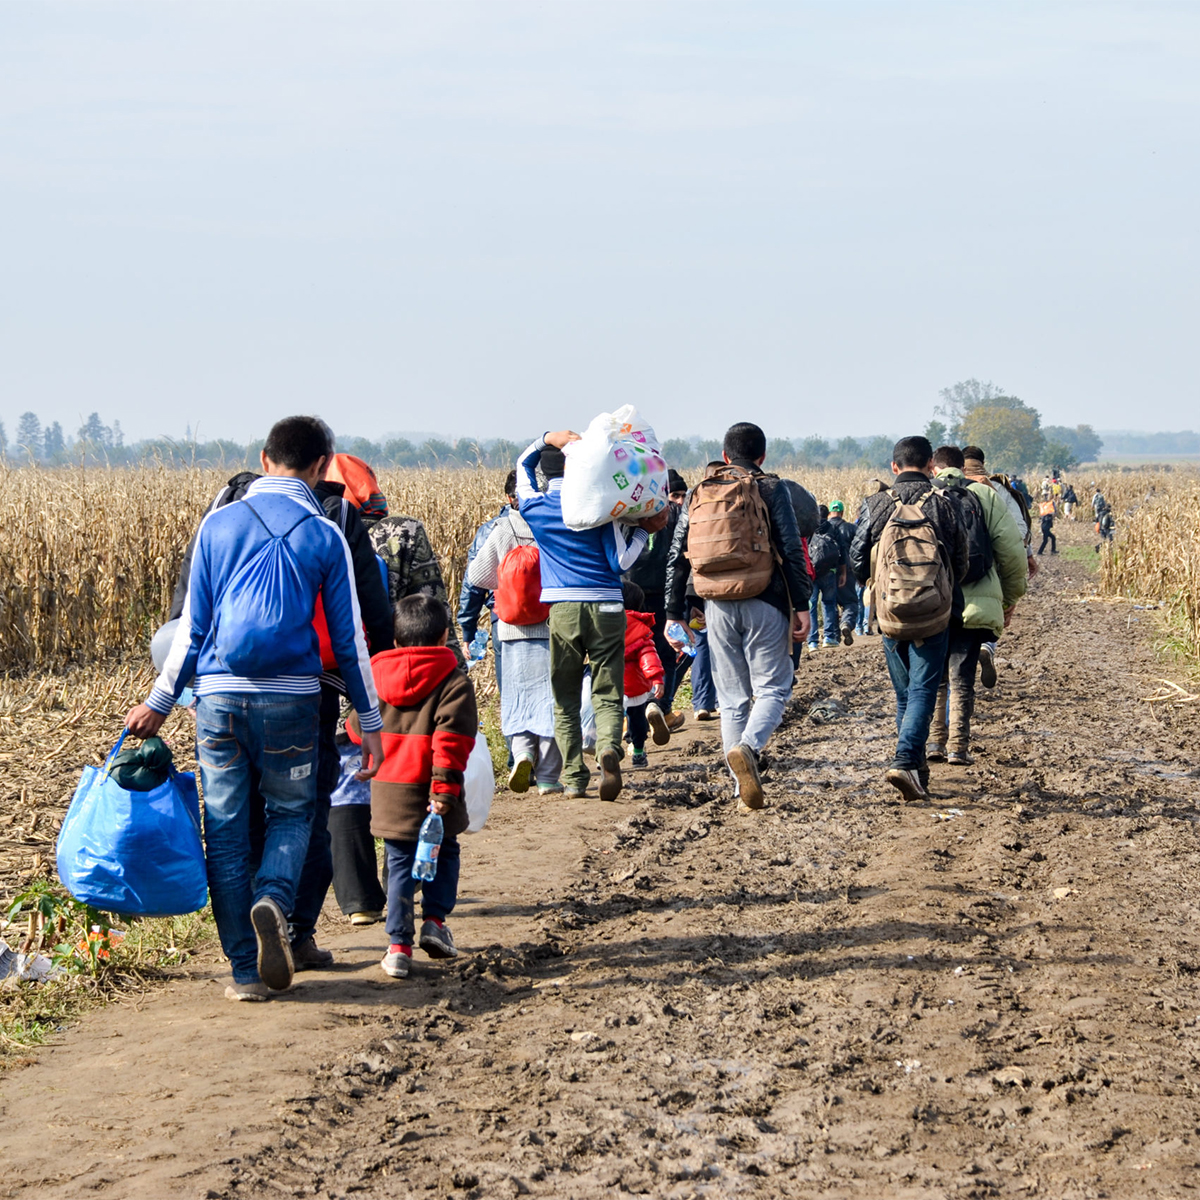 Refugees and migrants walking on fields. Group of refugees from